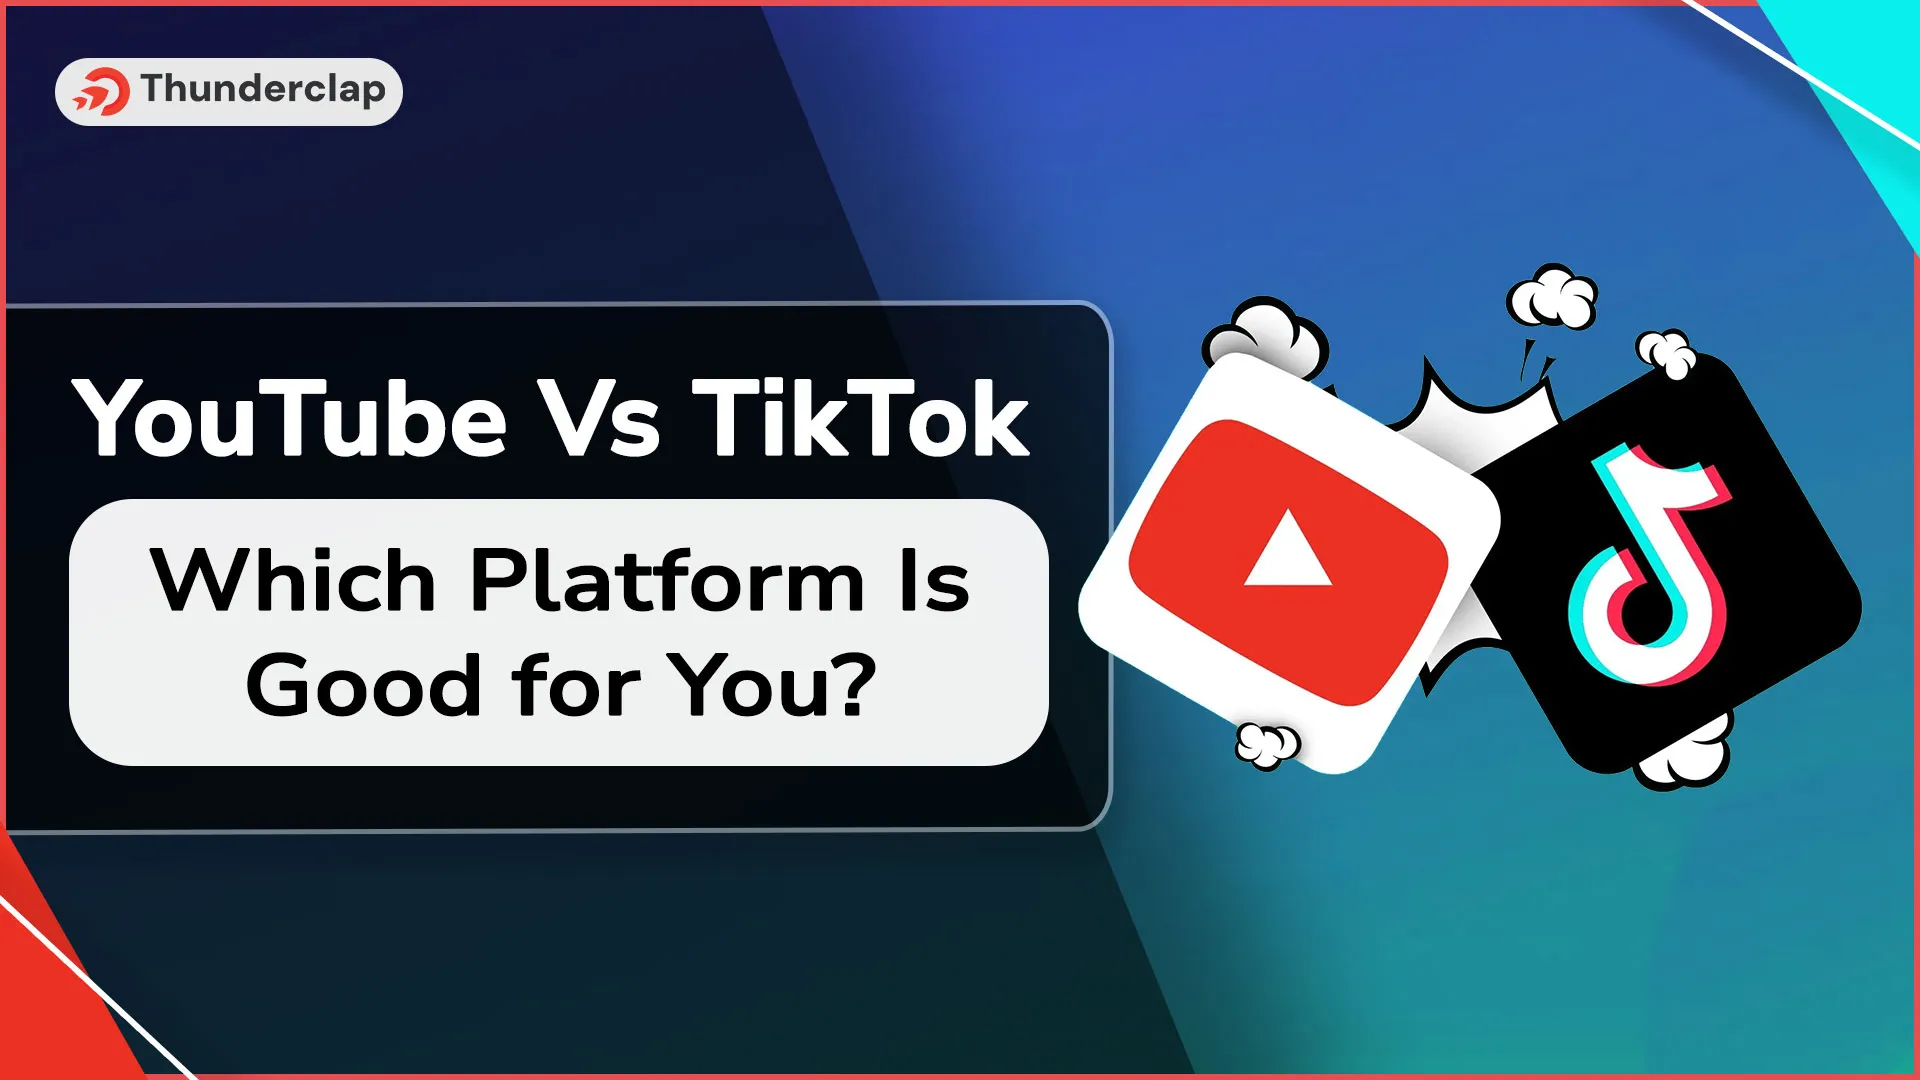 YouTube Vs TikTok Which Platform Is Good for You